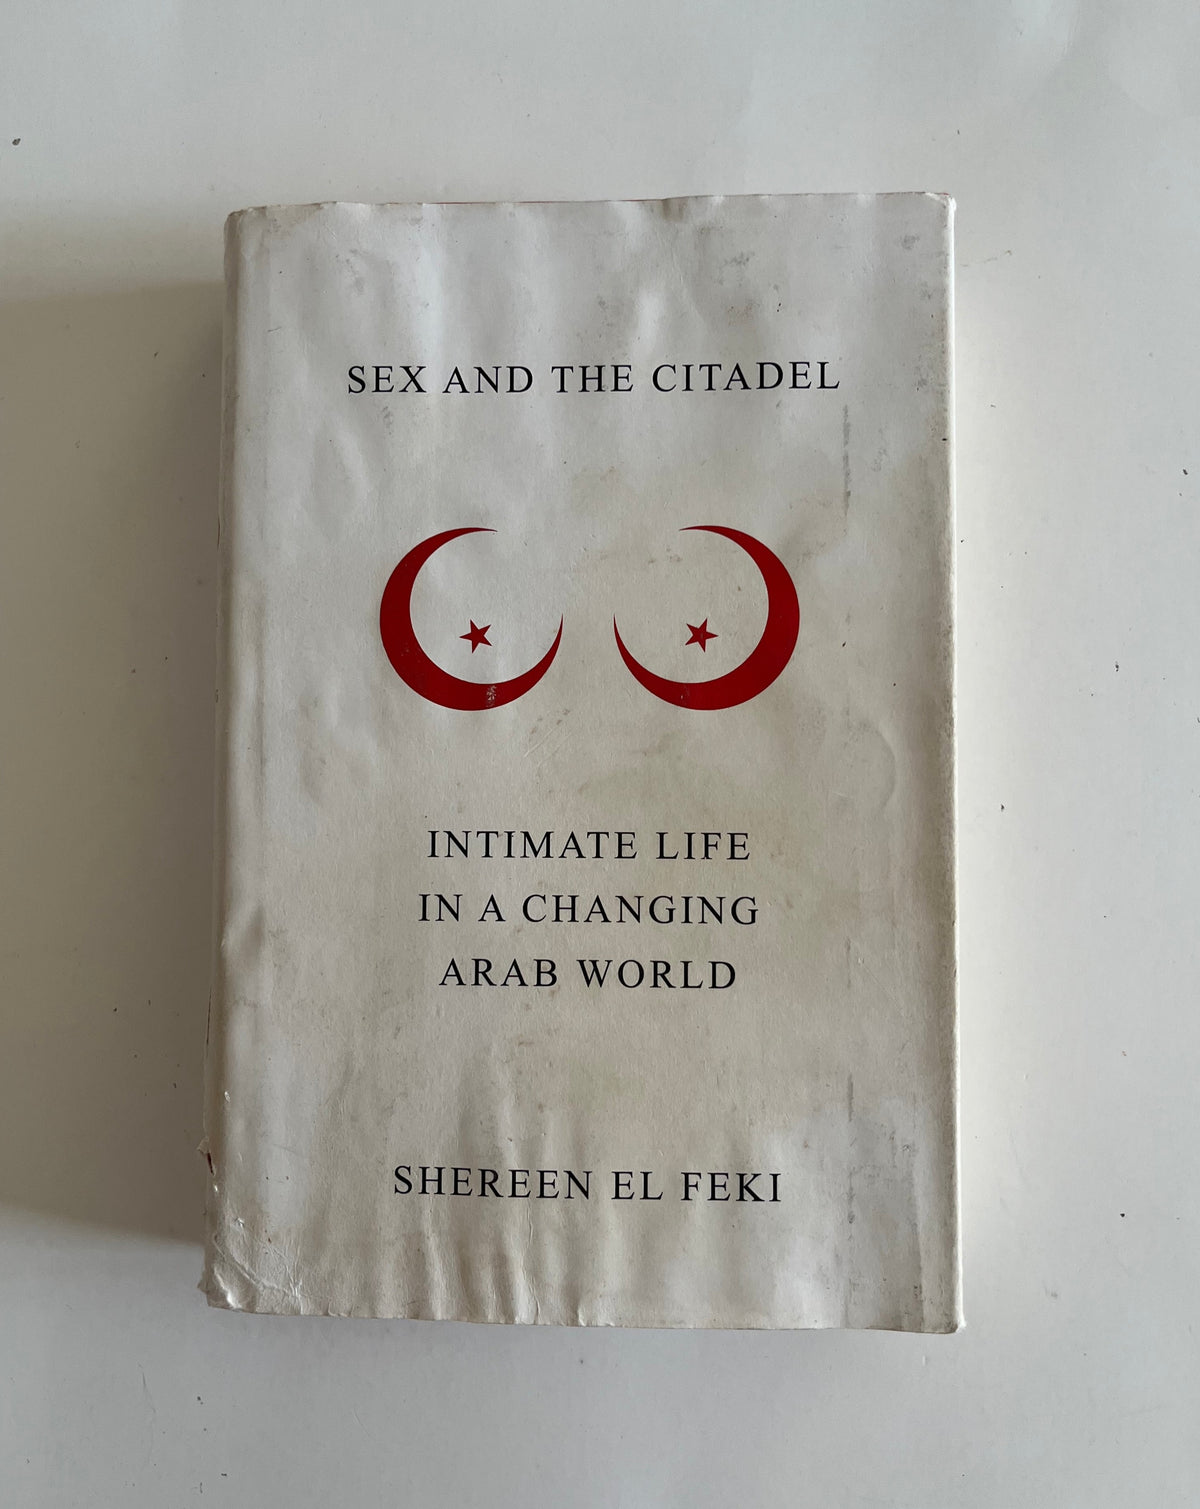 Sex and the Citadel: Intimate Life in a Changing Arab World by Shereen El Feki